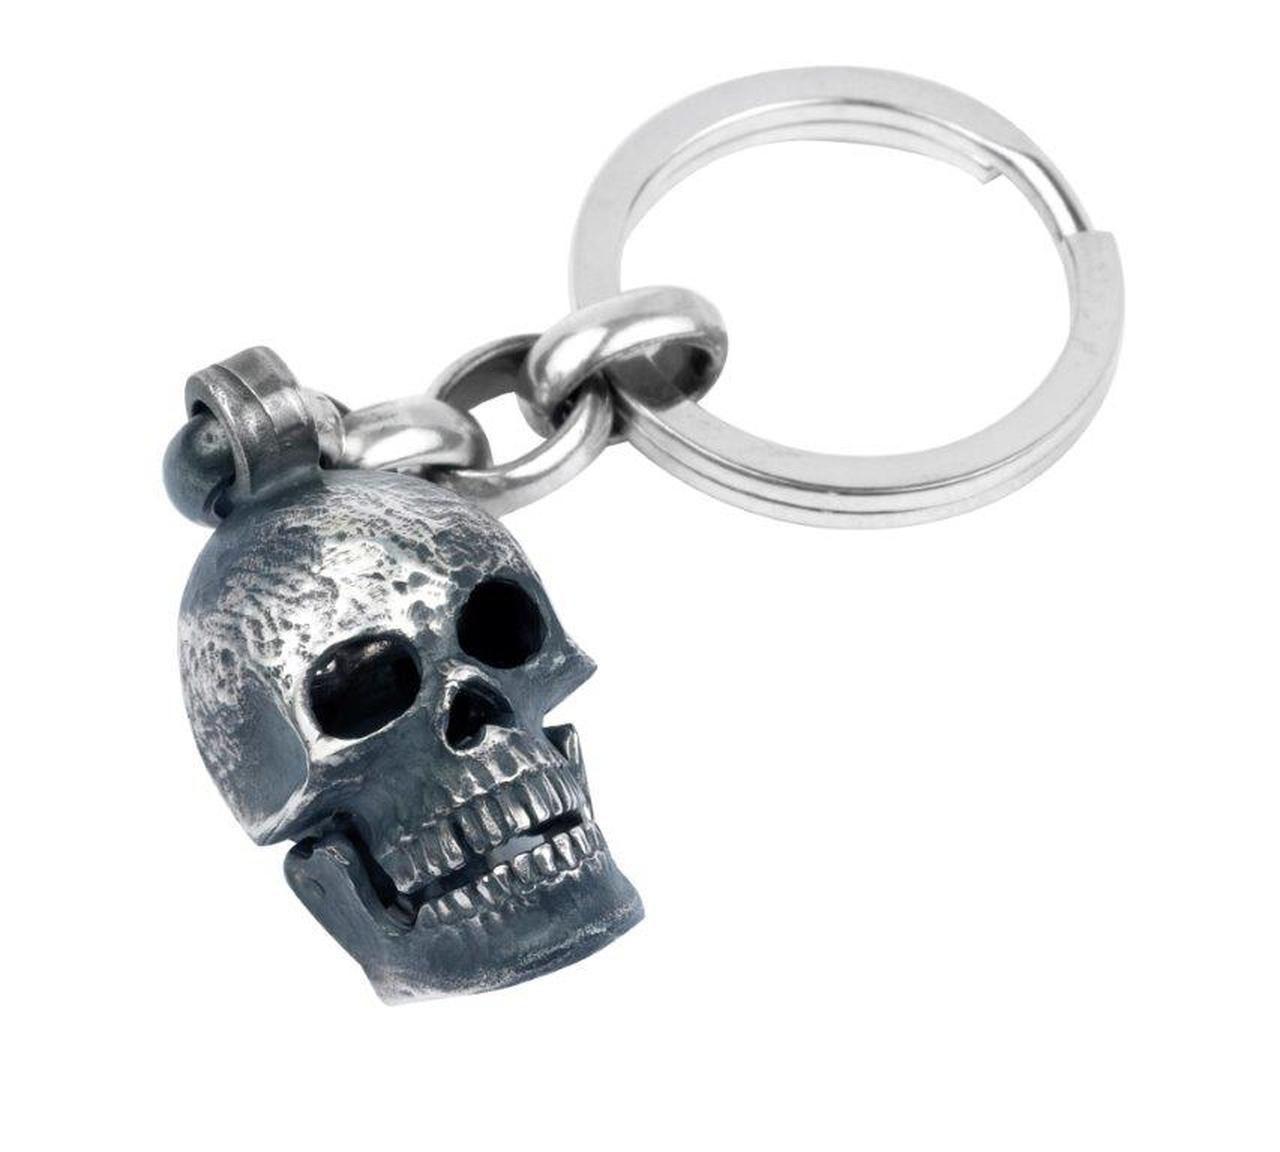 This solid, weighty Sterling Silver skulls head key ring will guard your keys with its life! Featuring the Deakin & Francis iconic jaw dropping, eye popping design with bright Cubic Zirconia eyes .
Featuring the Deakin & Francis logo for